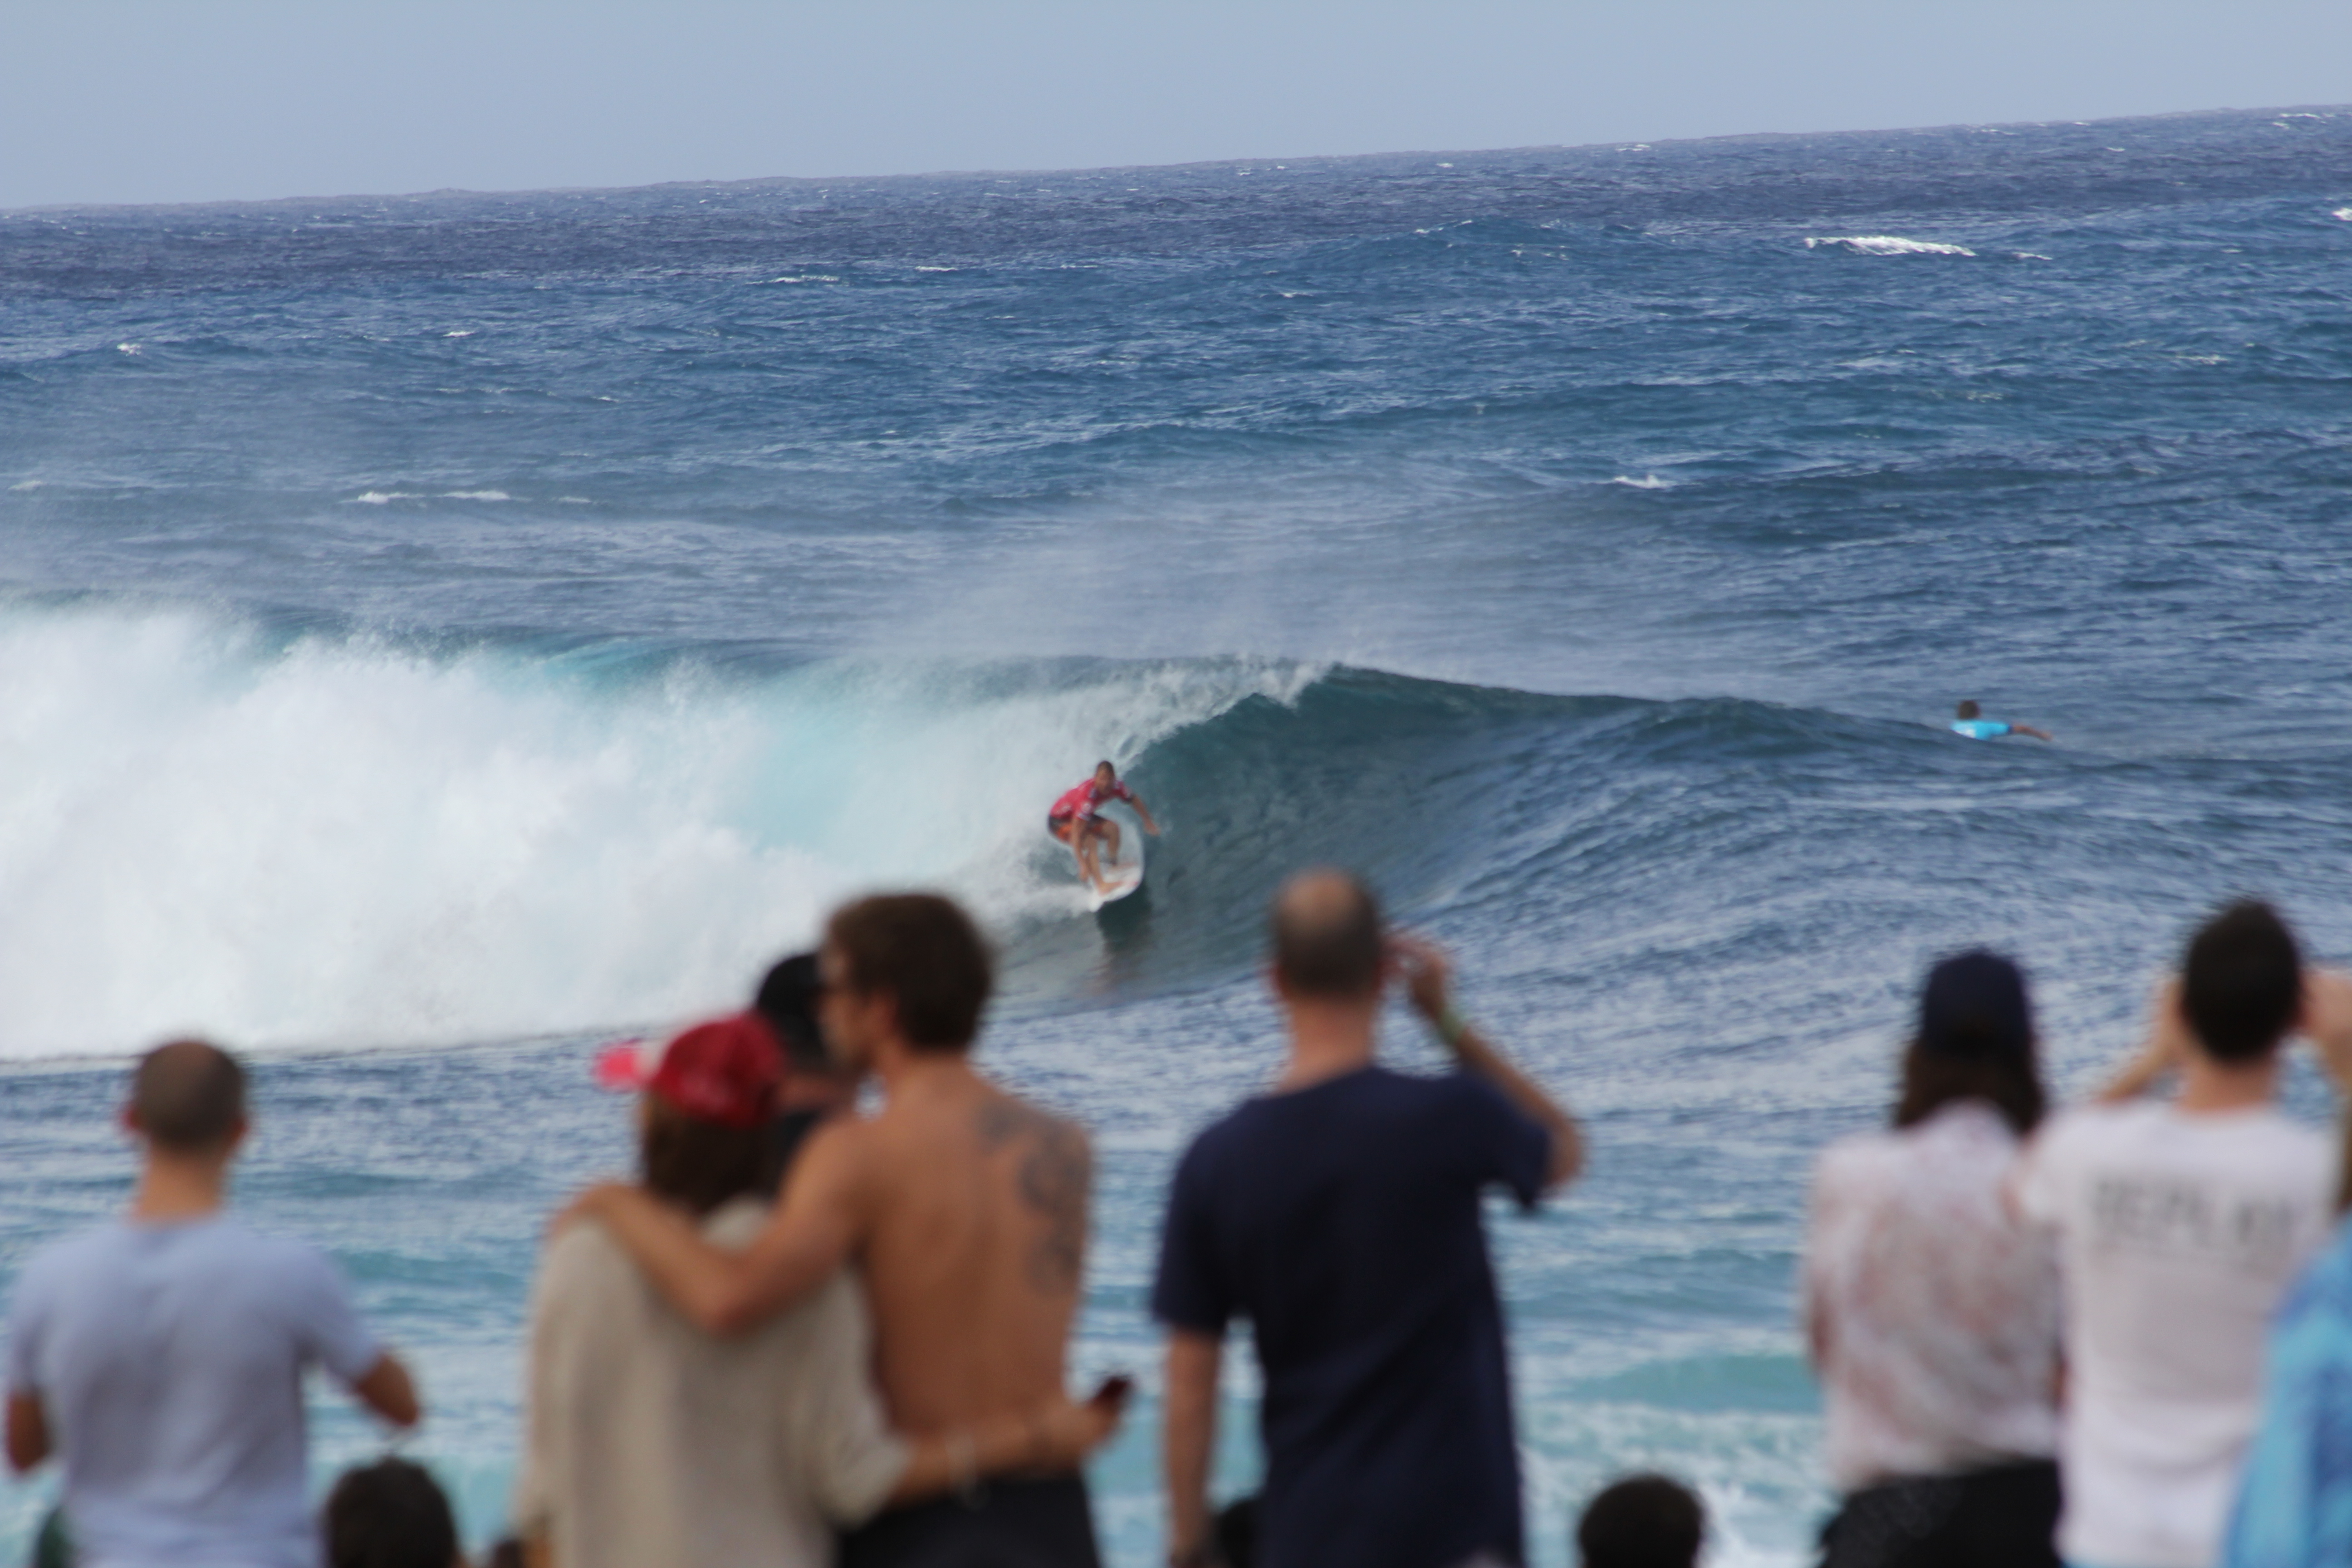 2012 Hawaii Family Trip - Day 3 (Billabong Pipe Masters Surfing Competition, McDonalds Taro Pie, Pearl Harbor Memorial, Diamond Head Crater Hike)